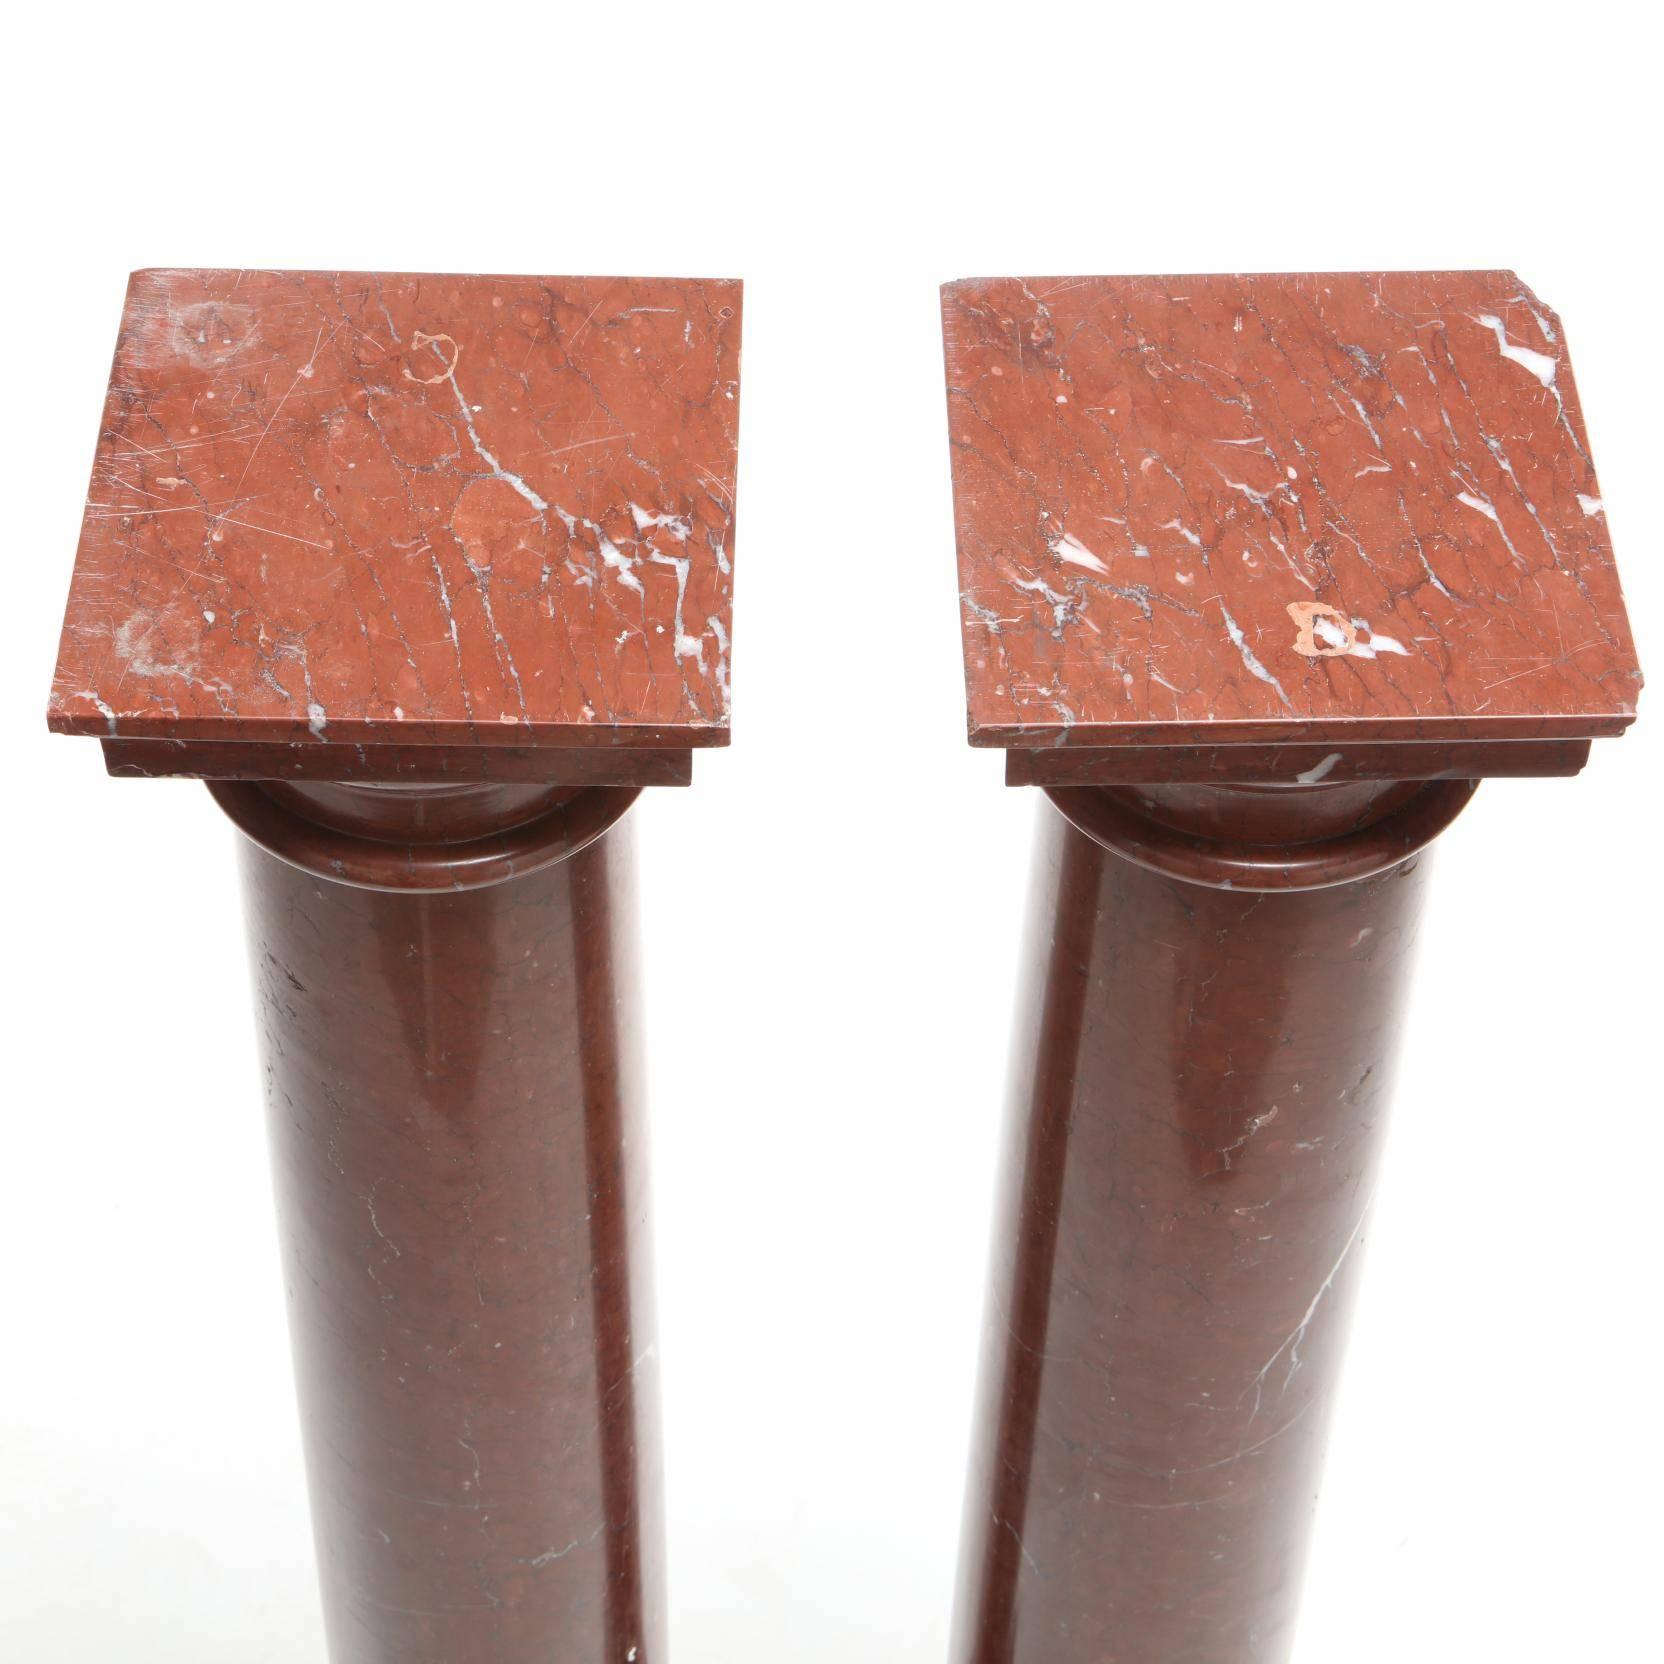 Pair of very fine quality neoclassical style rouge marble pedestals.

   